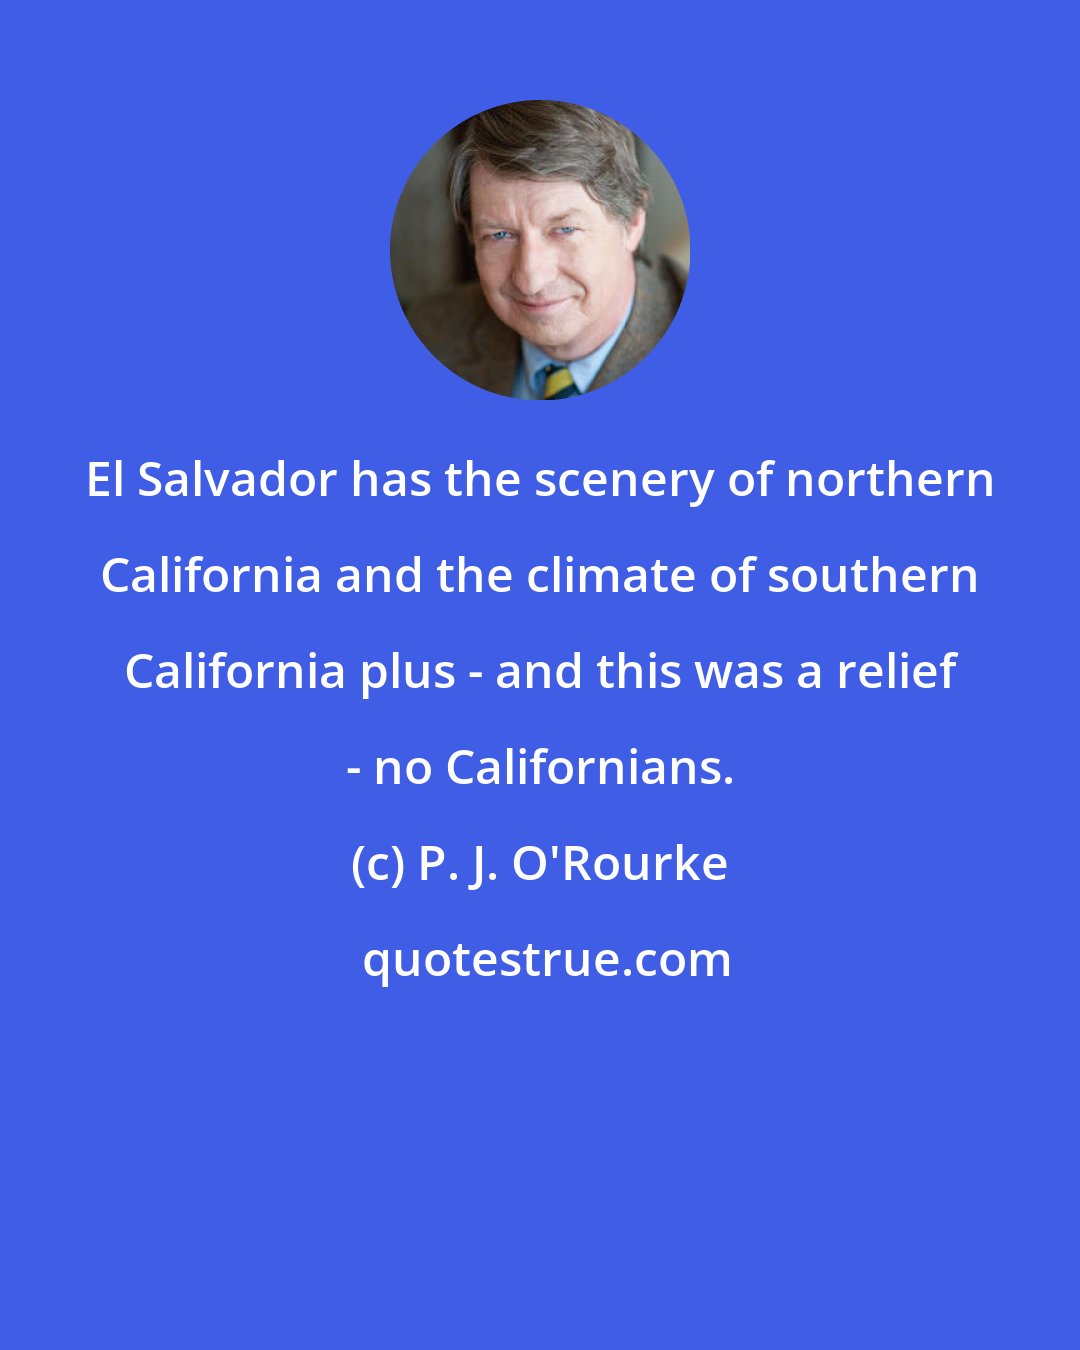 P. J. O'Rourke: El Salvador has the scenery of northern California and the climate of southern California plus - and this was a relief - no Californians.